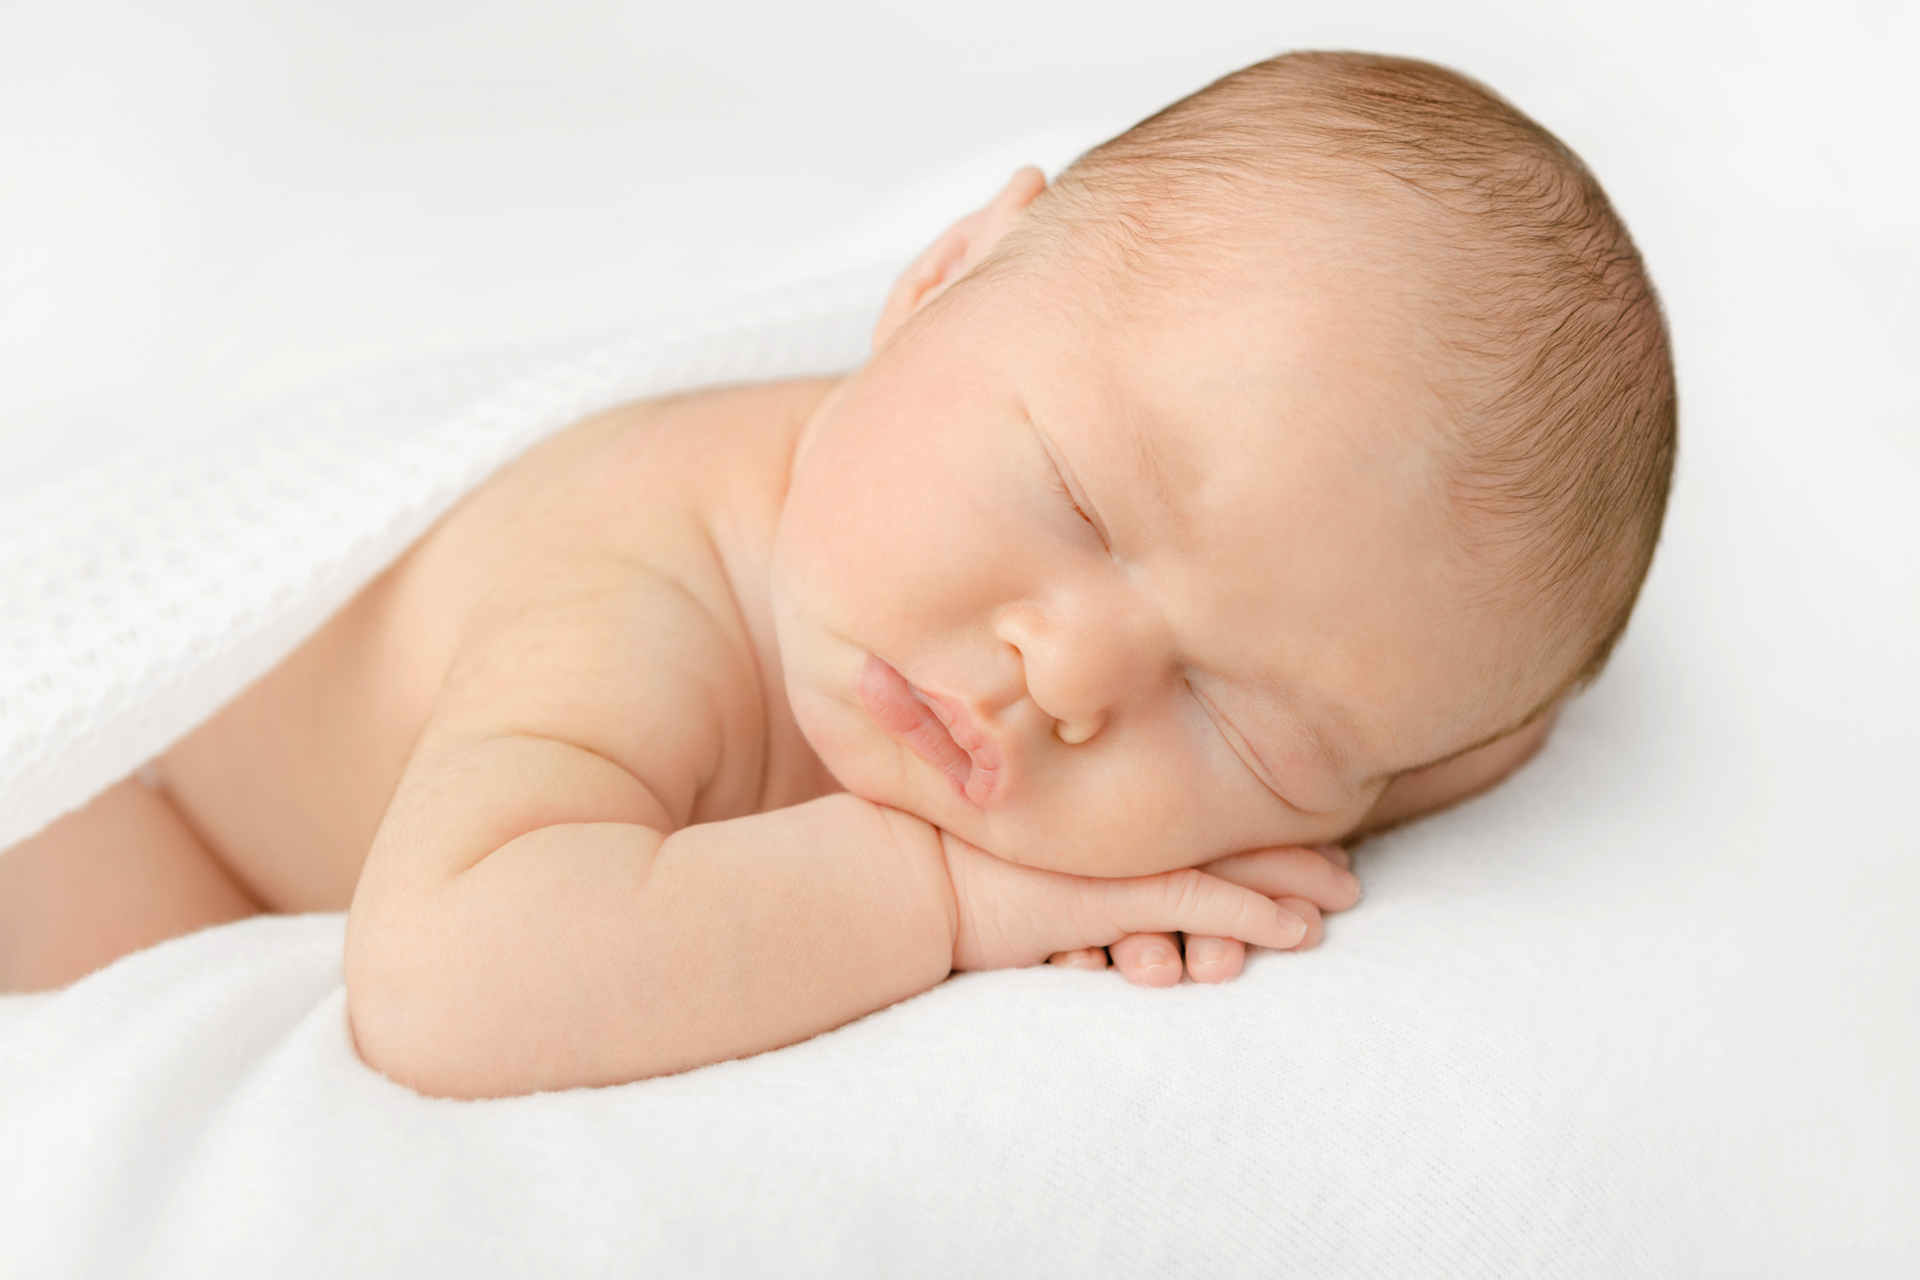 newborn baby girl asleep on her folded arms, with a white blanket draped over her